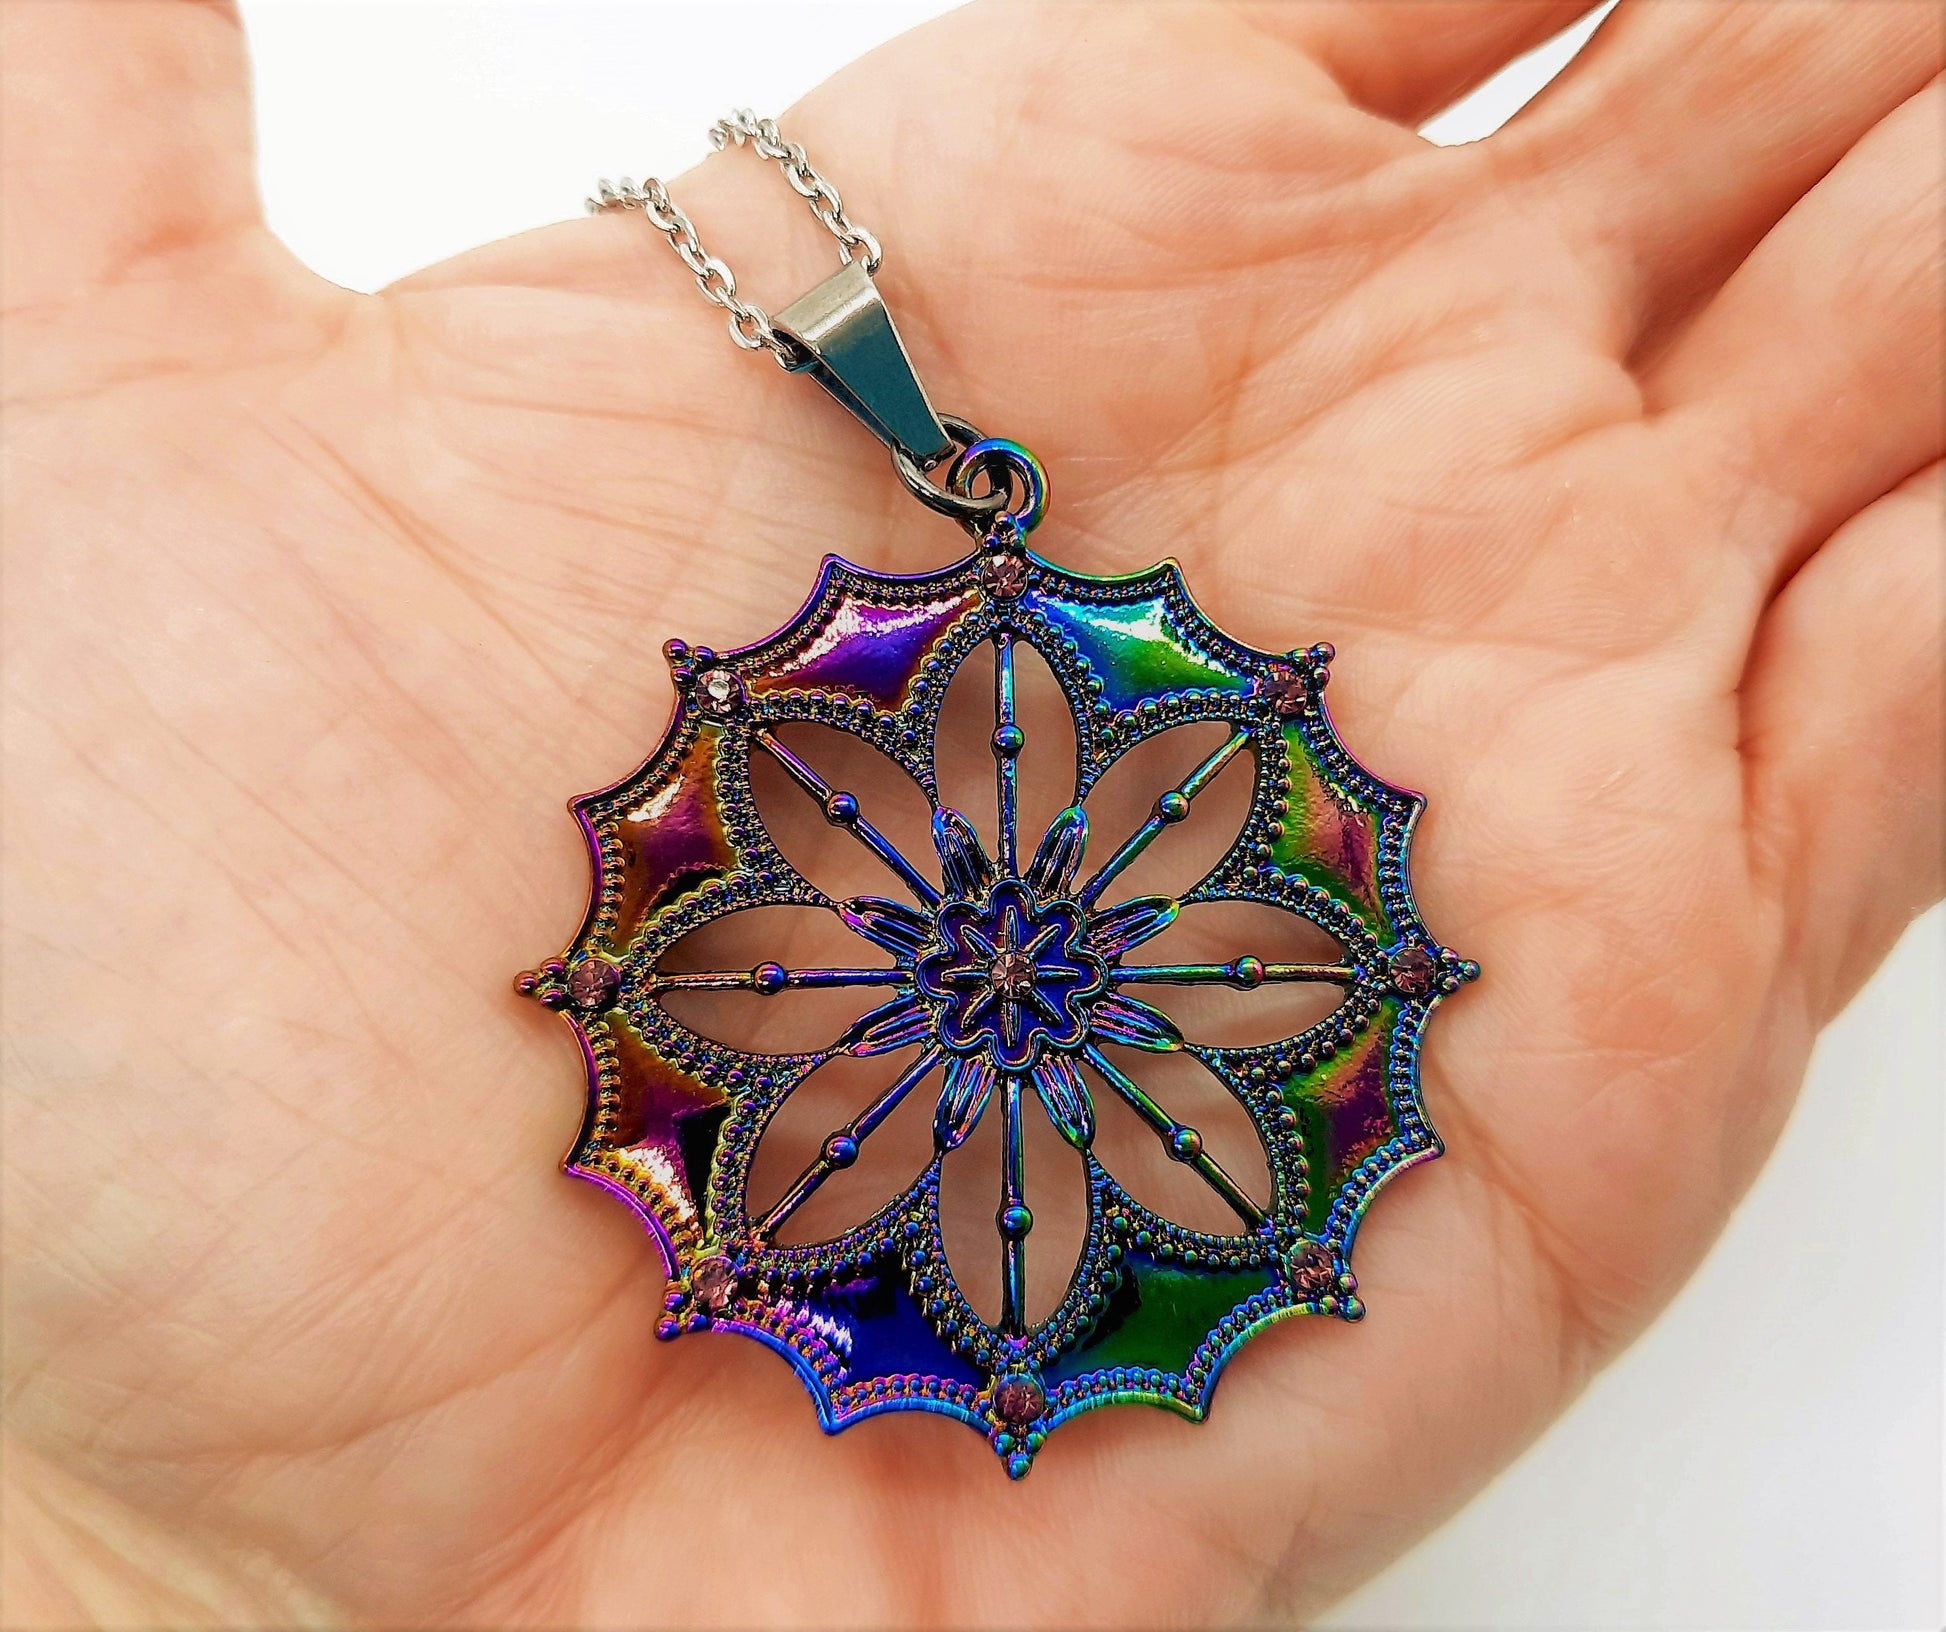 Rainbow Chromium Mandala Pendant Necklace - Tibetan Style - Filigree Flower Pattern - Comes with 18" Stainless Steel Chain - Hypoallergenic